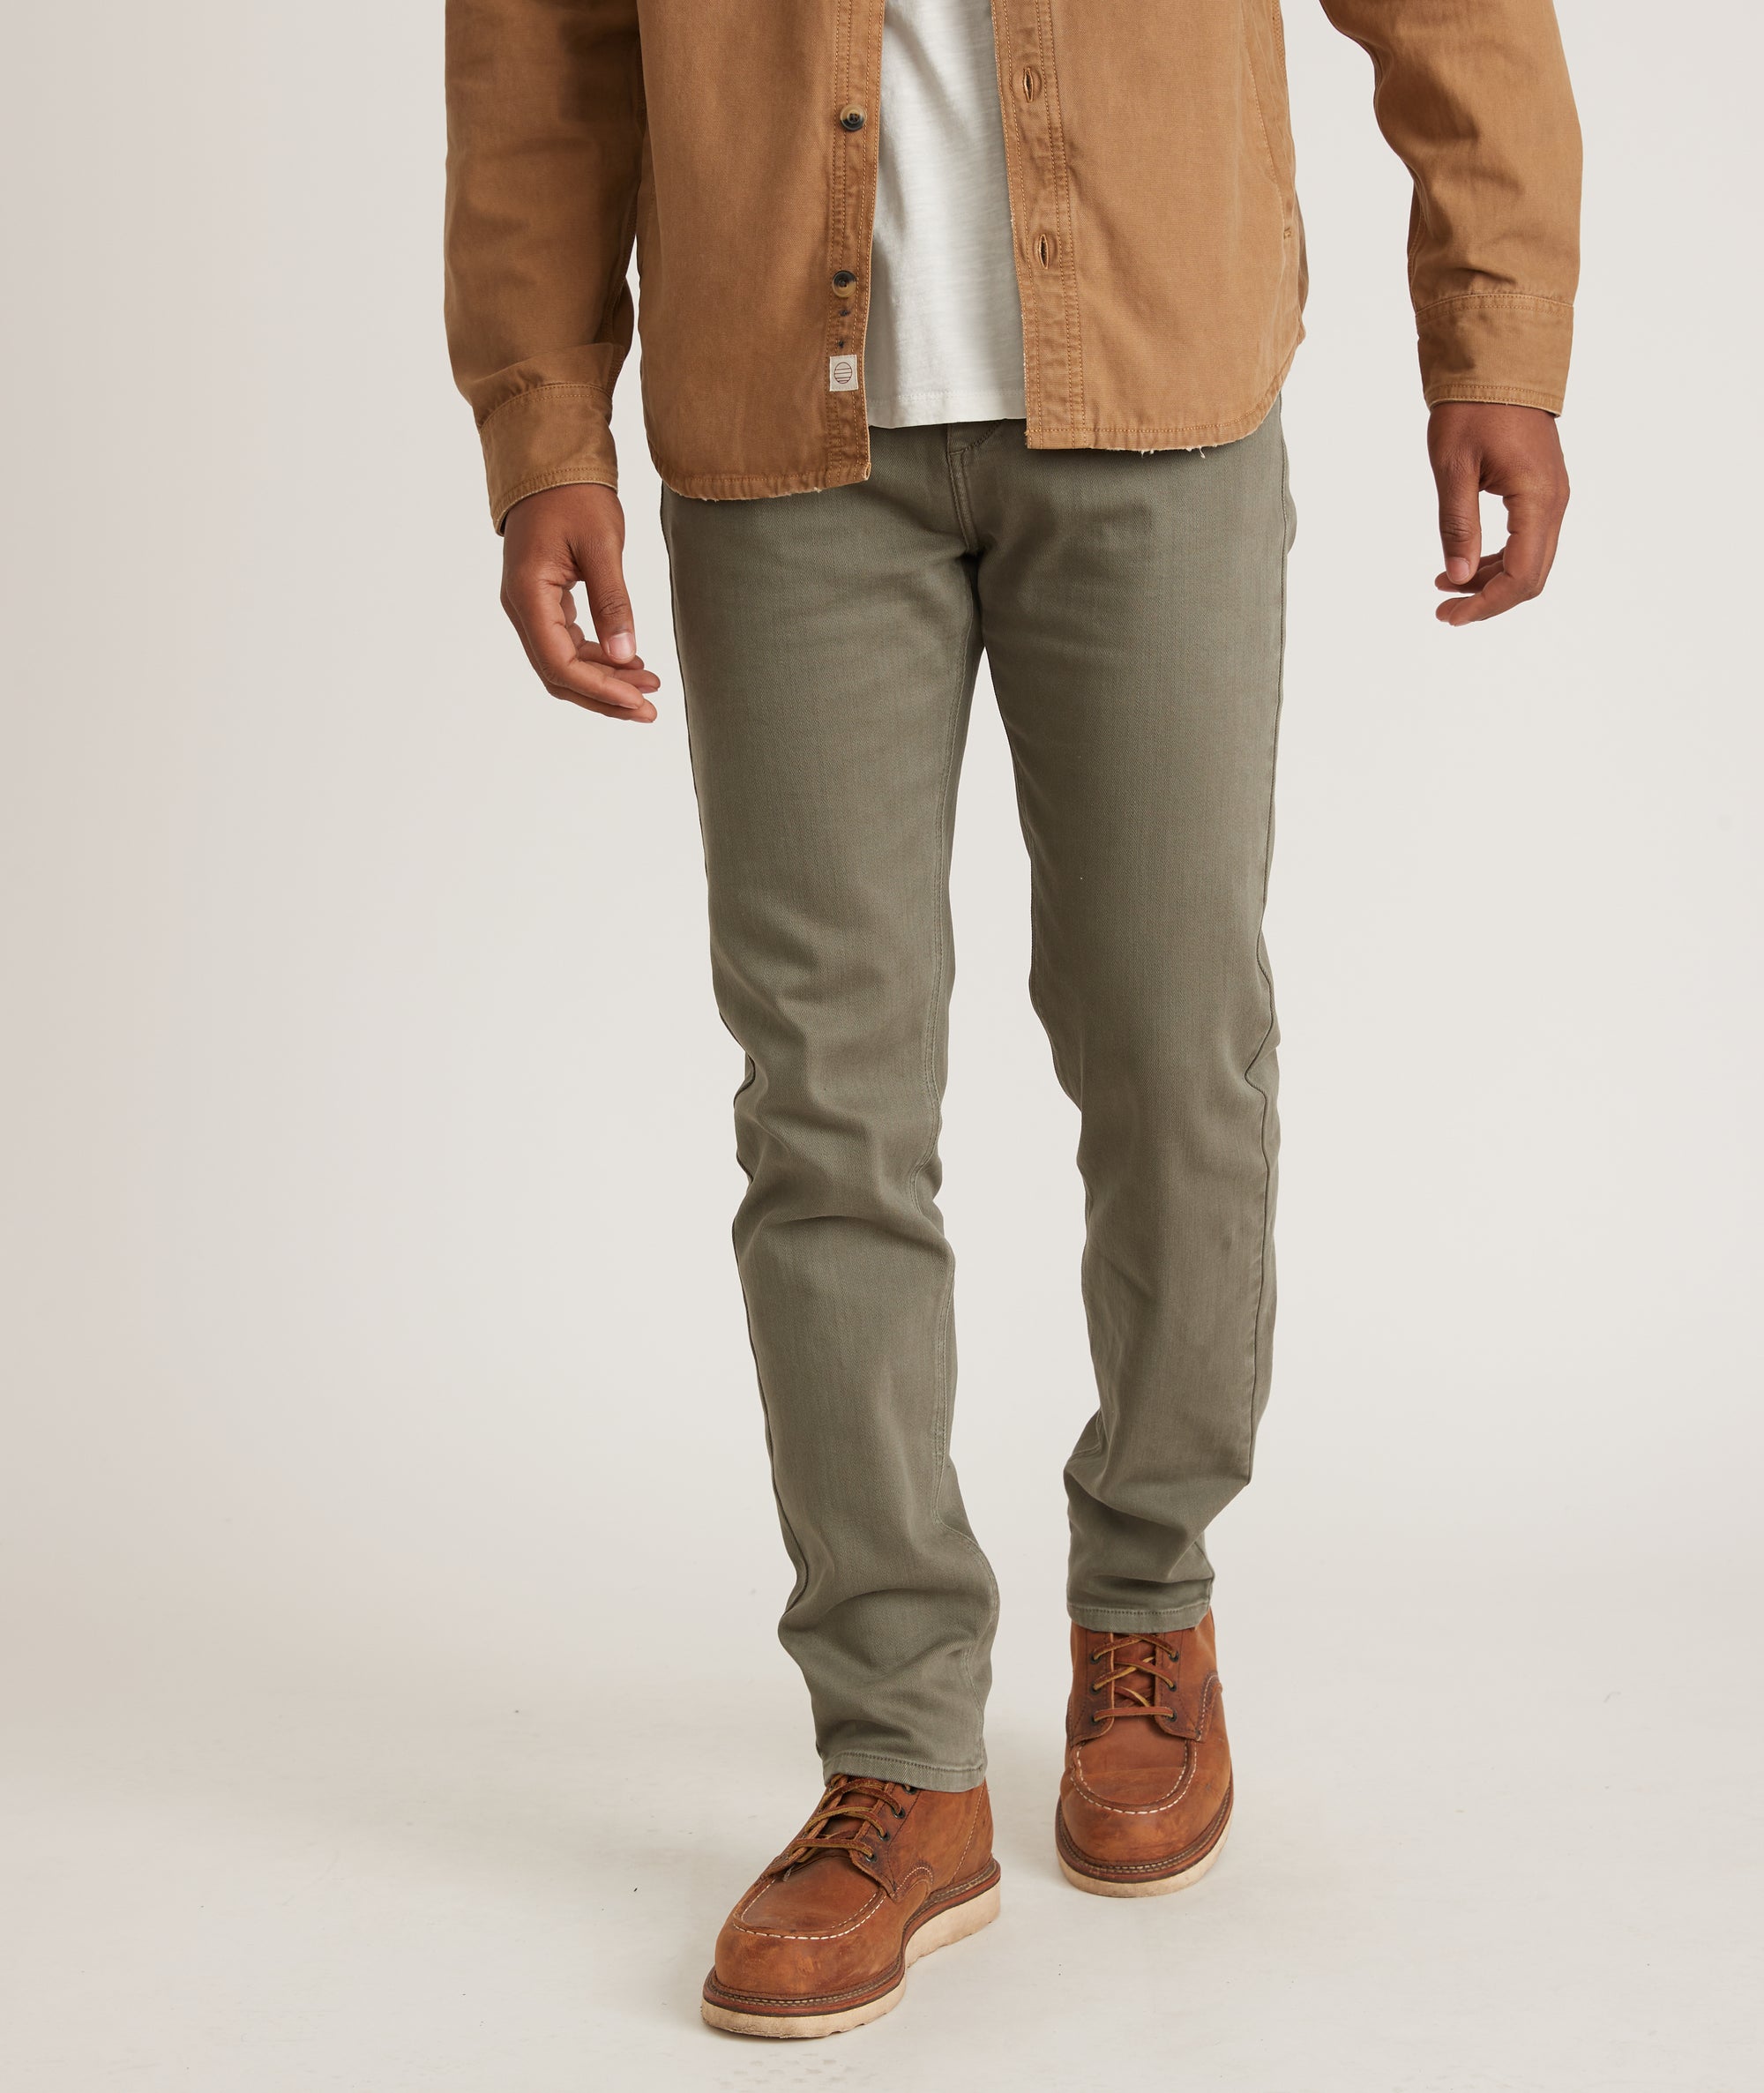 5 Pocket Pant Slim Olive in Layer Fit – Faded Marine